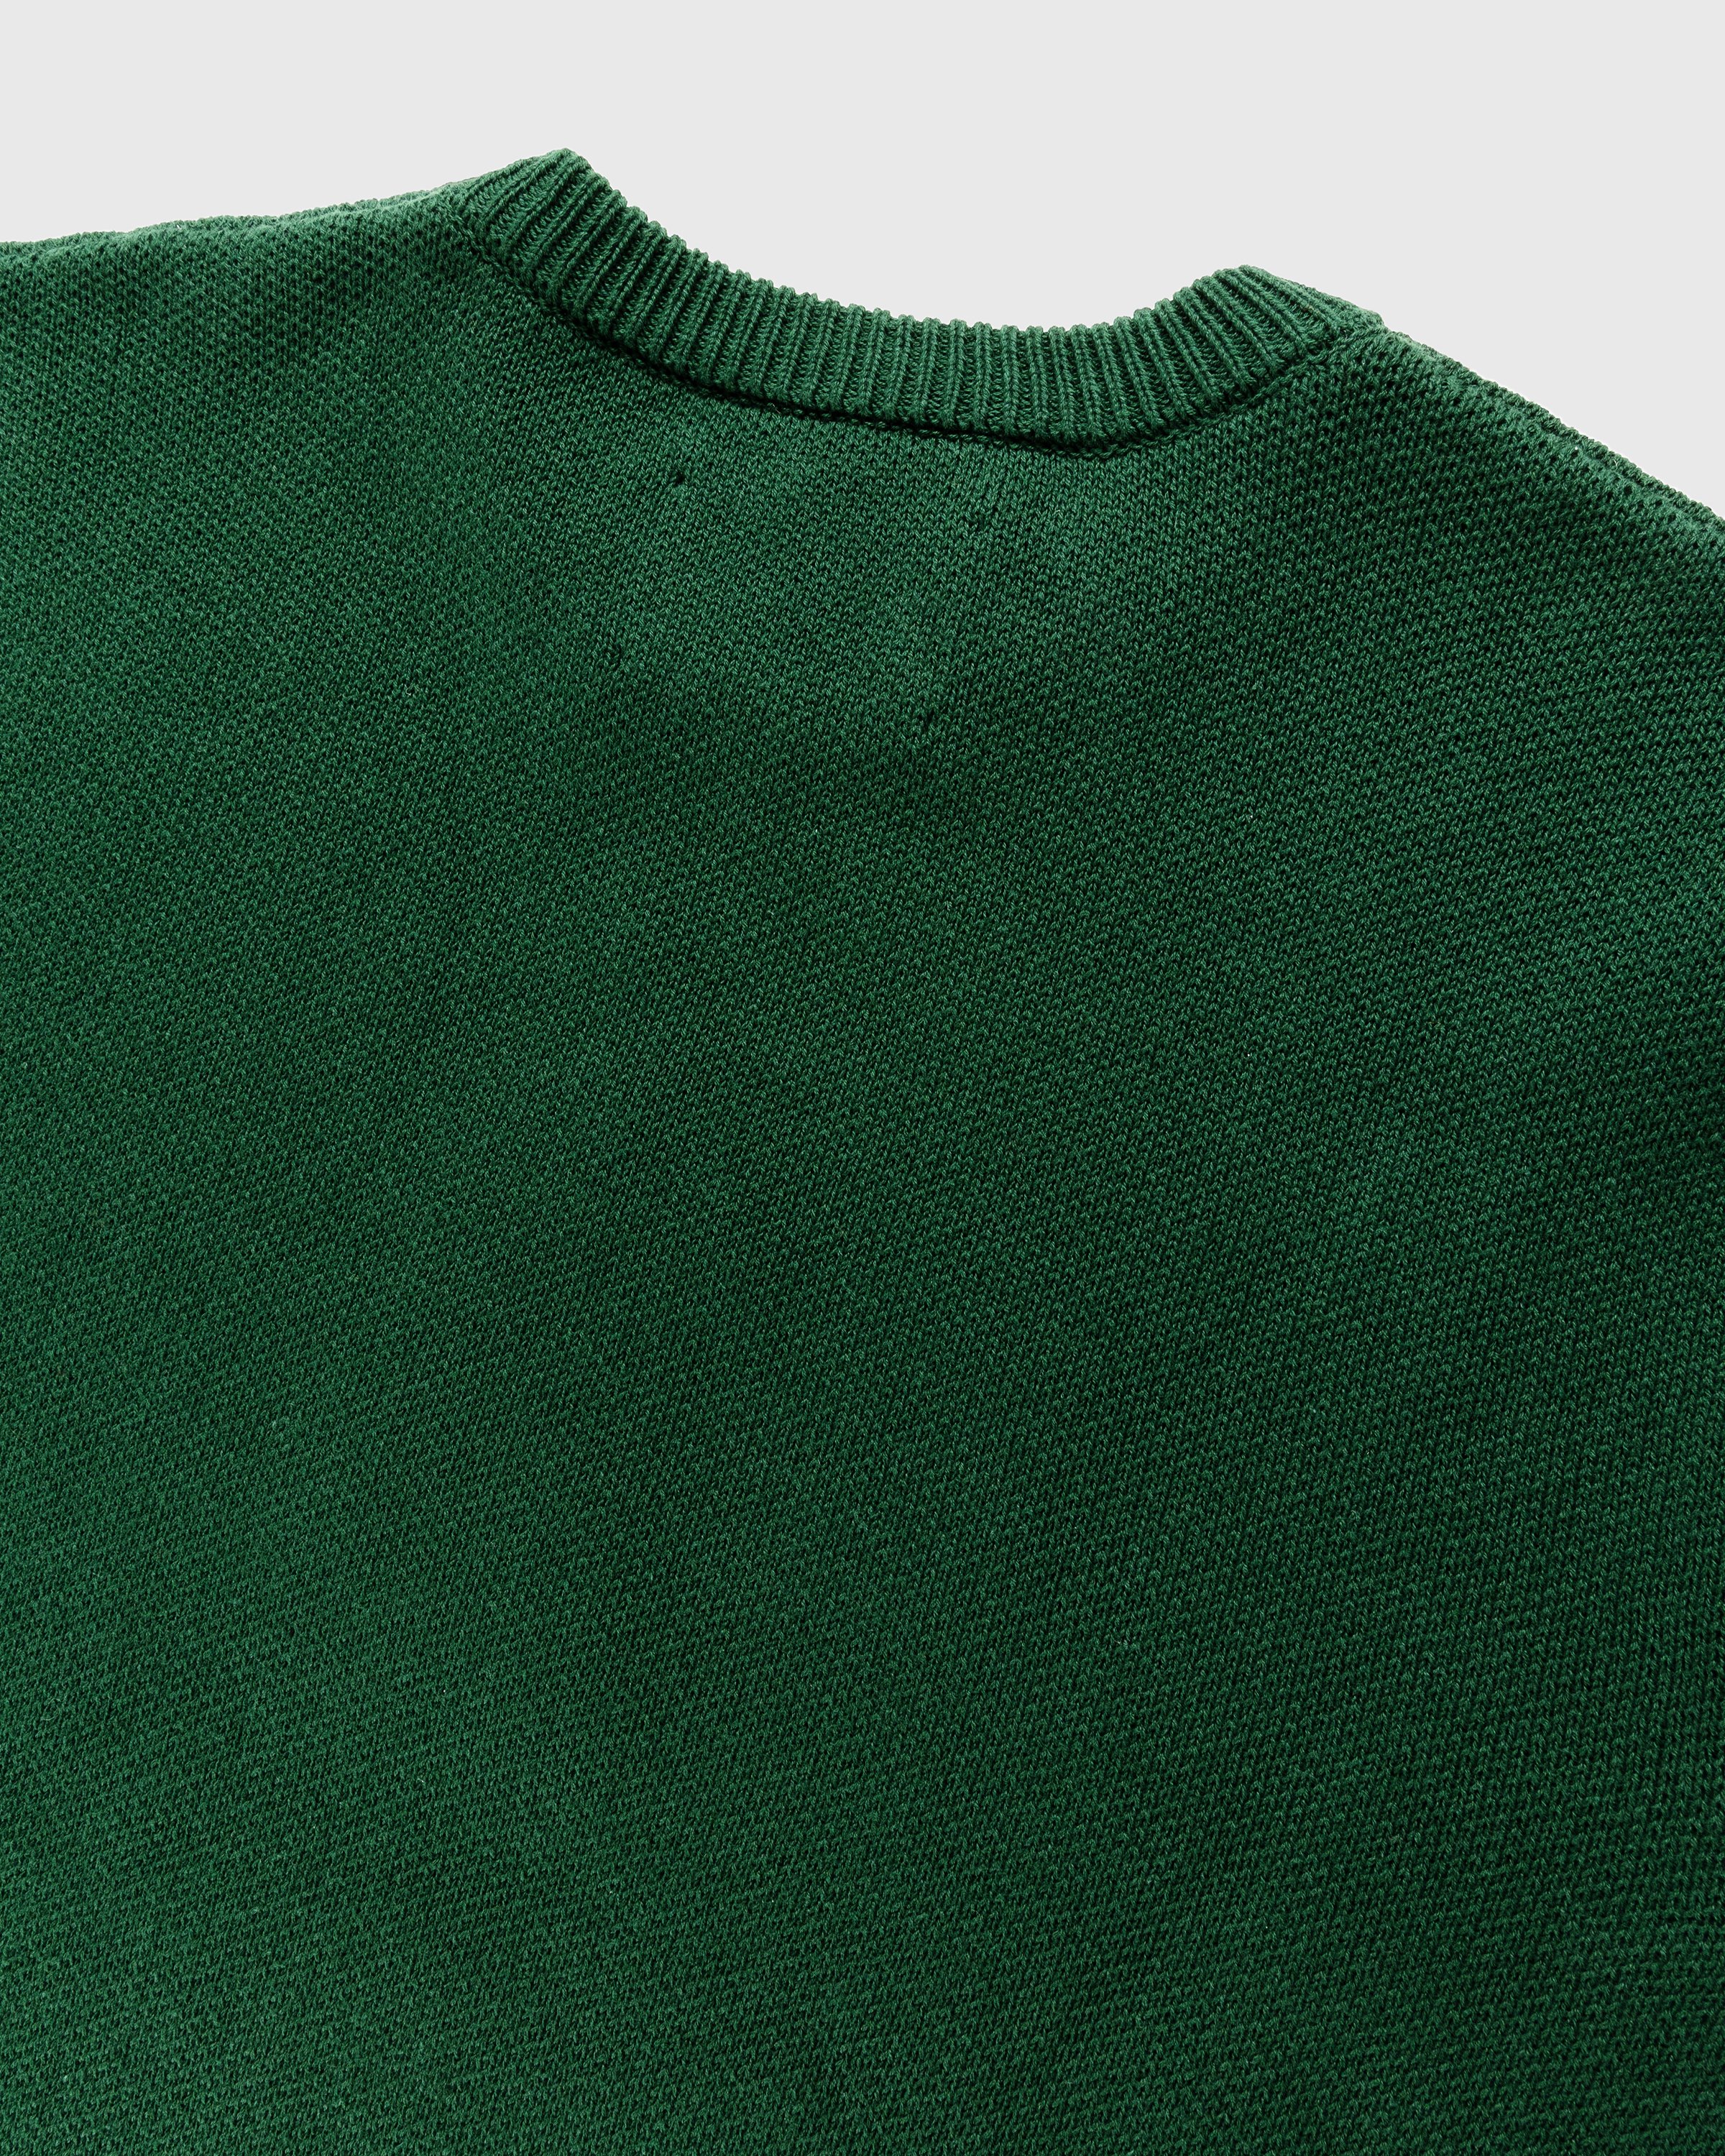 RUF x Highsnobiety - Knitted Crewneck Sweater Green - Clothing - Green - Image 6